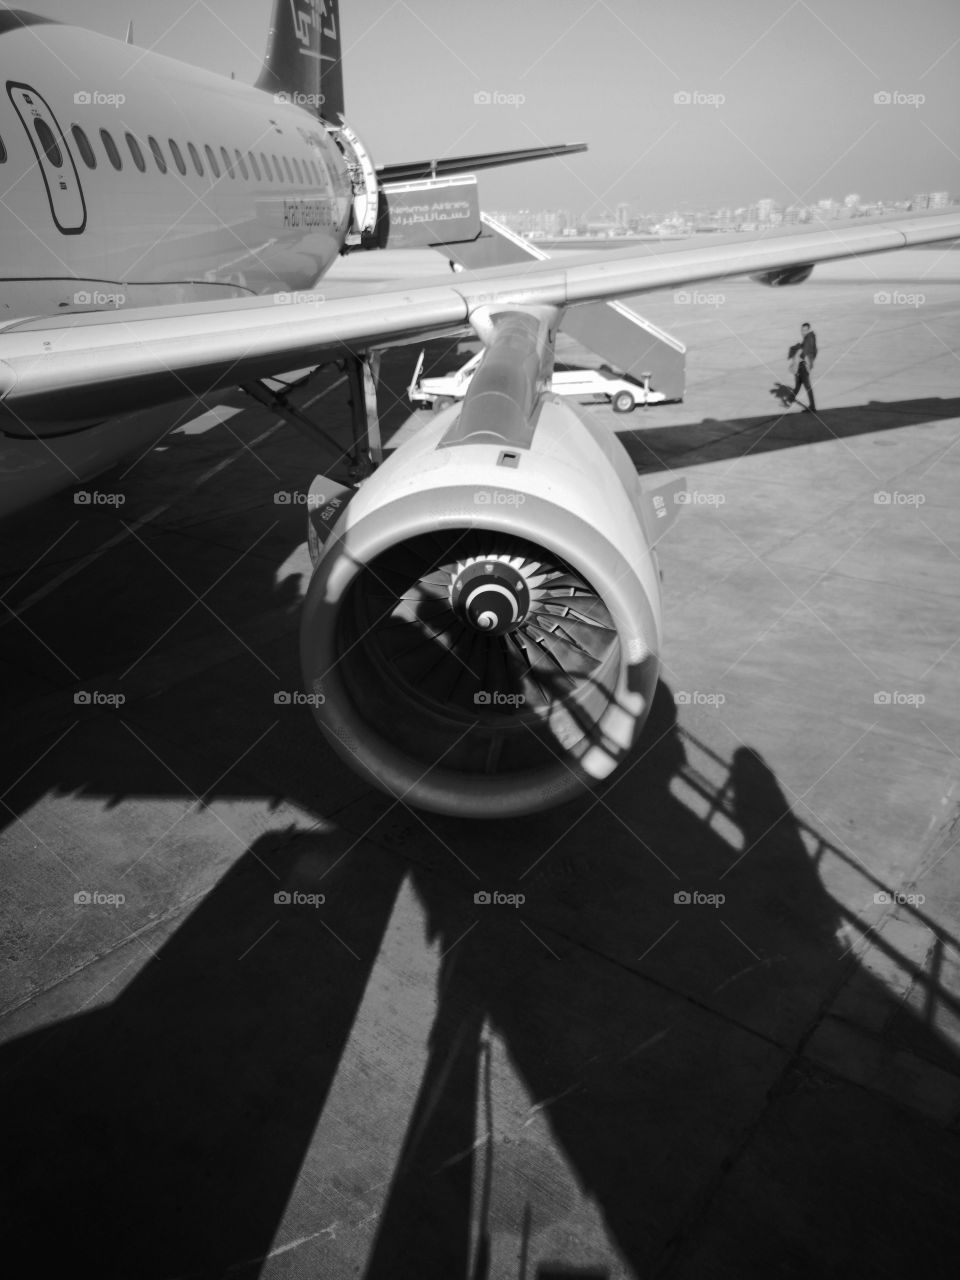 Jet engine and plane wing from airport.